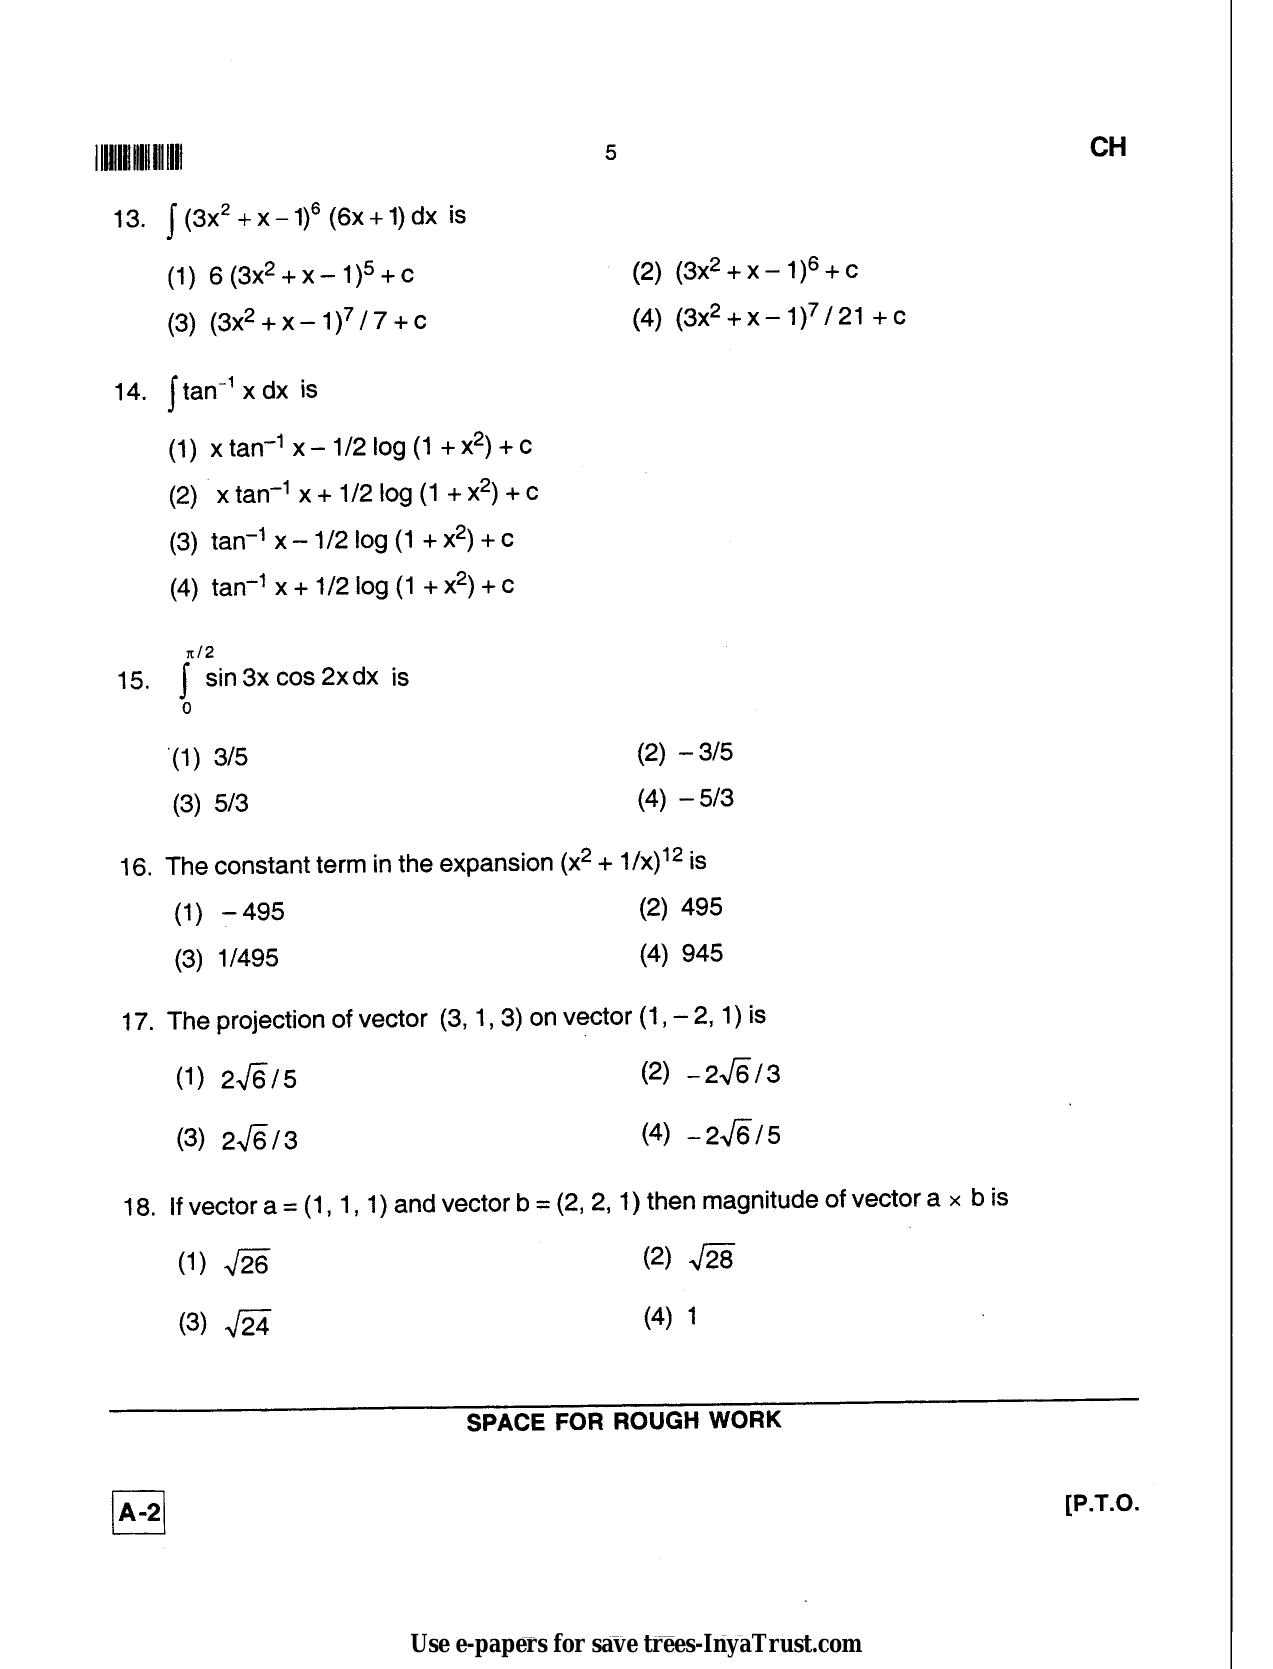 Karnataka Diploma CET- 2013 Chemical Engineering / Polymer Technology Question Paper - Page 5